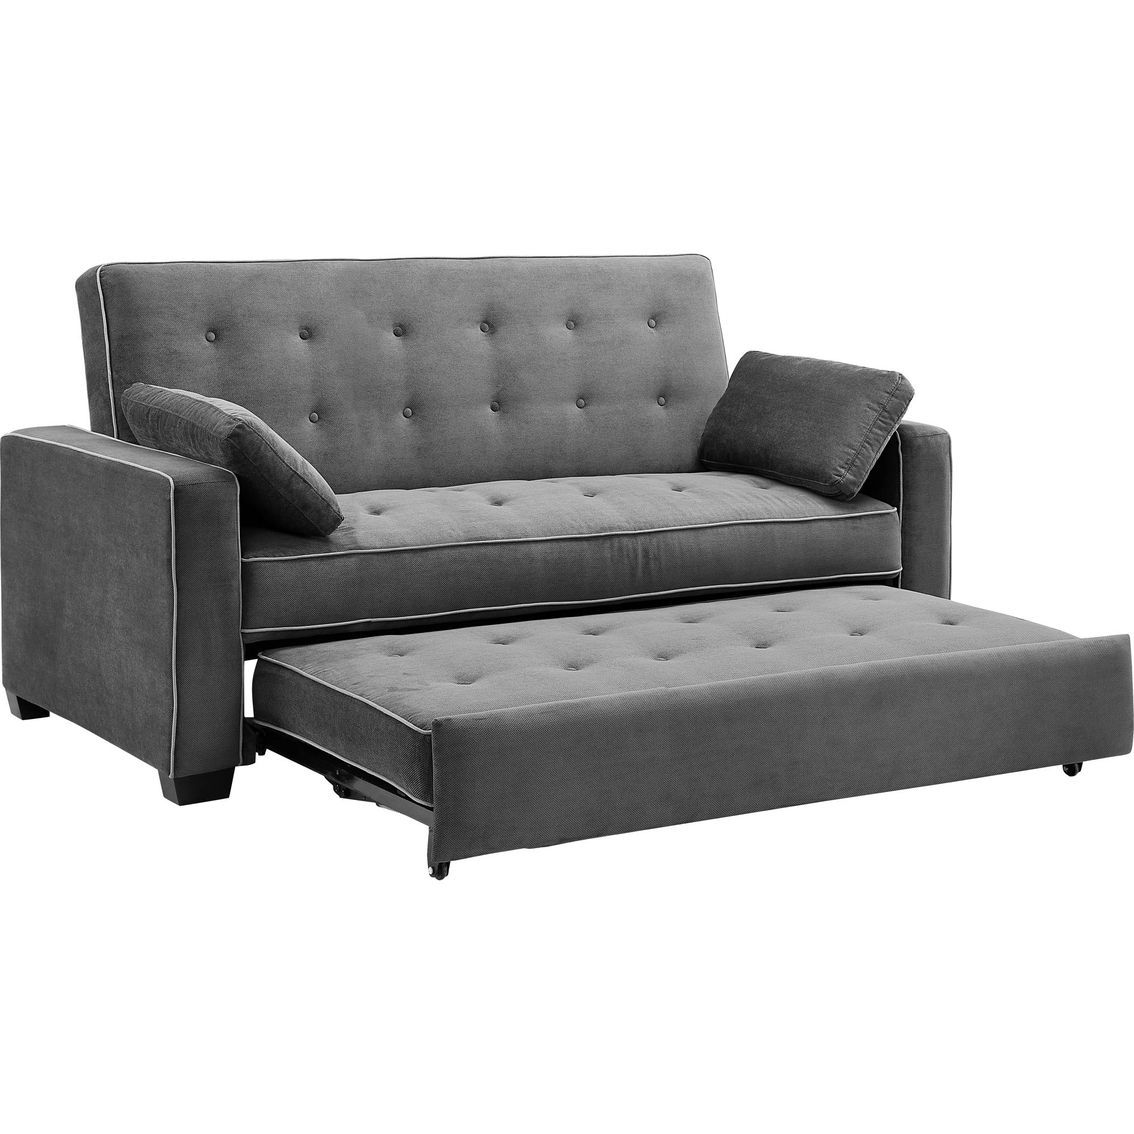 6 * 5 Feet Grey Convertible Sofa Bed, Rs 23000 /unit Viswak Enterprise For Convertible Light Gray Chair Beds (View 14 of 20)